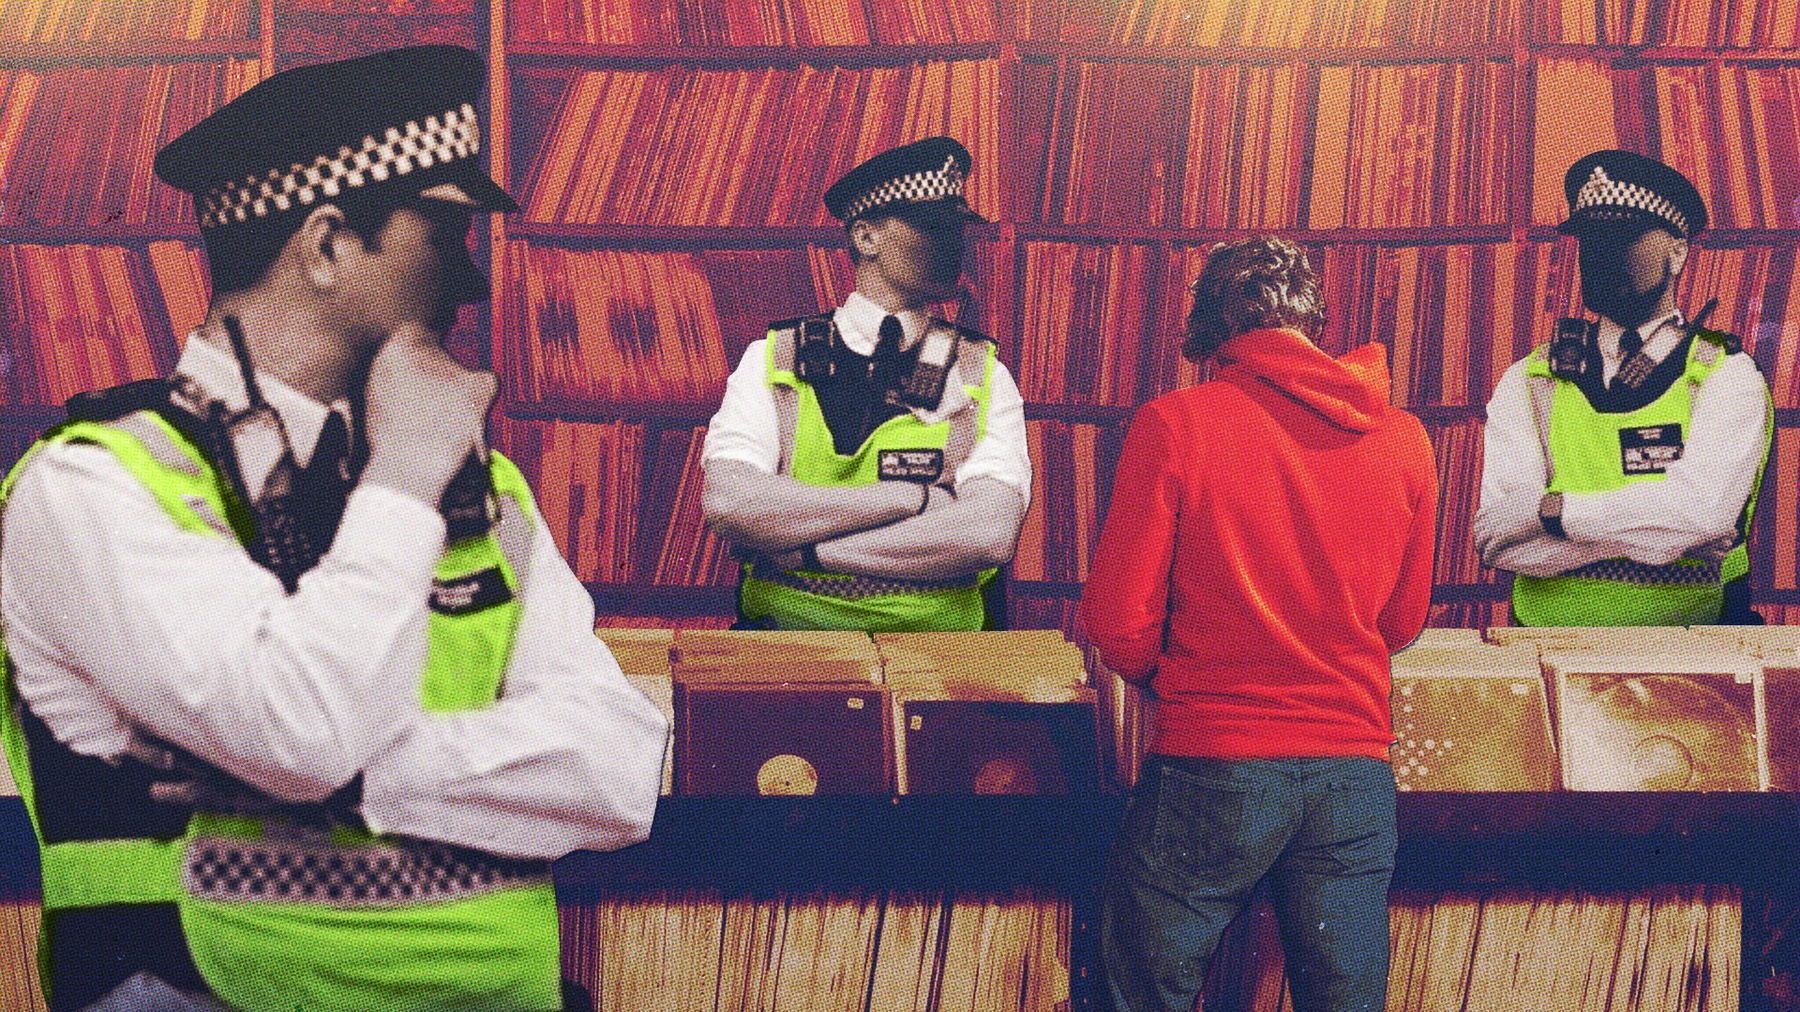 Vice has a scoop on an appalling undercover police sting